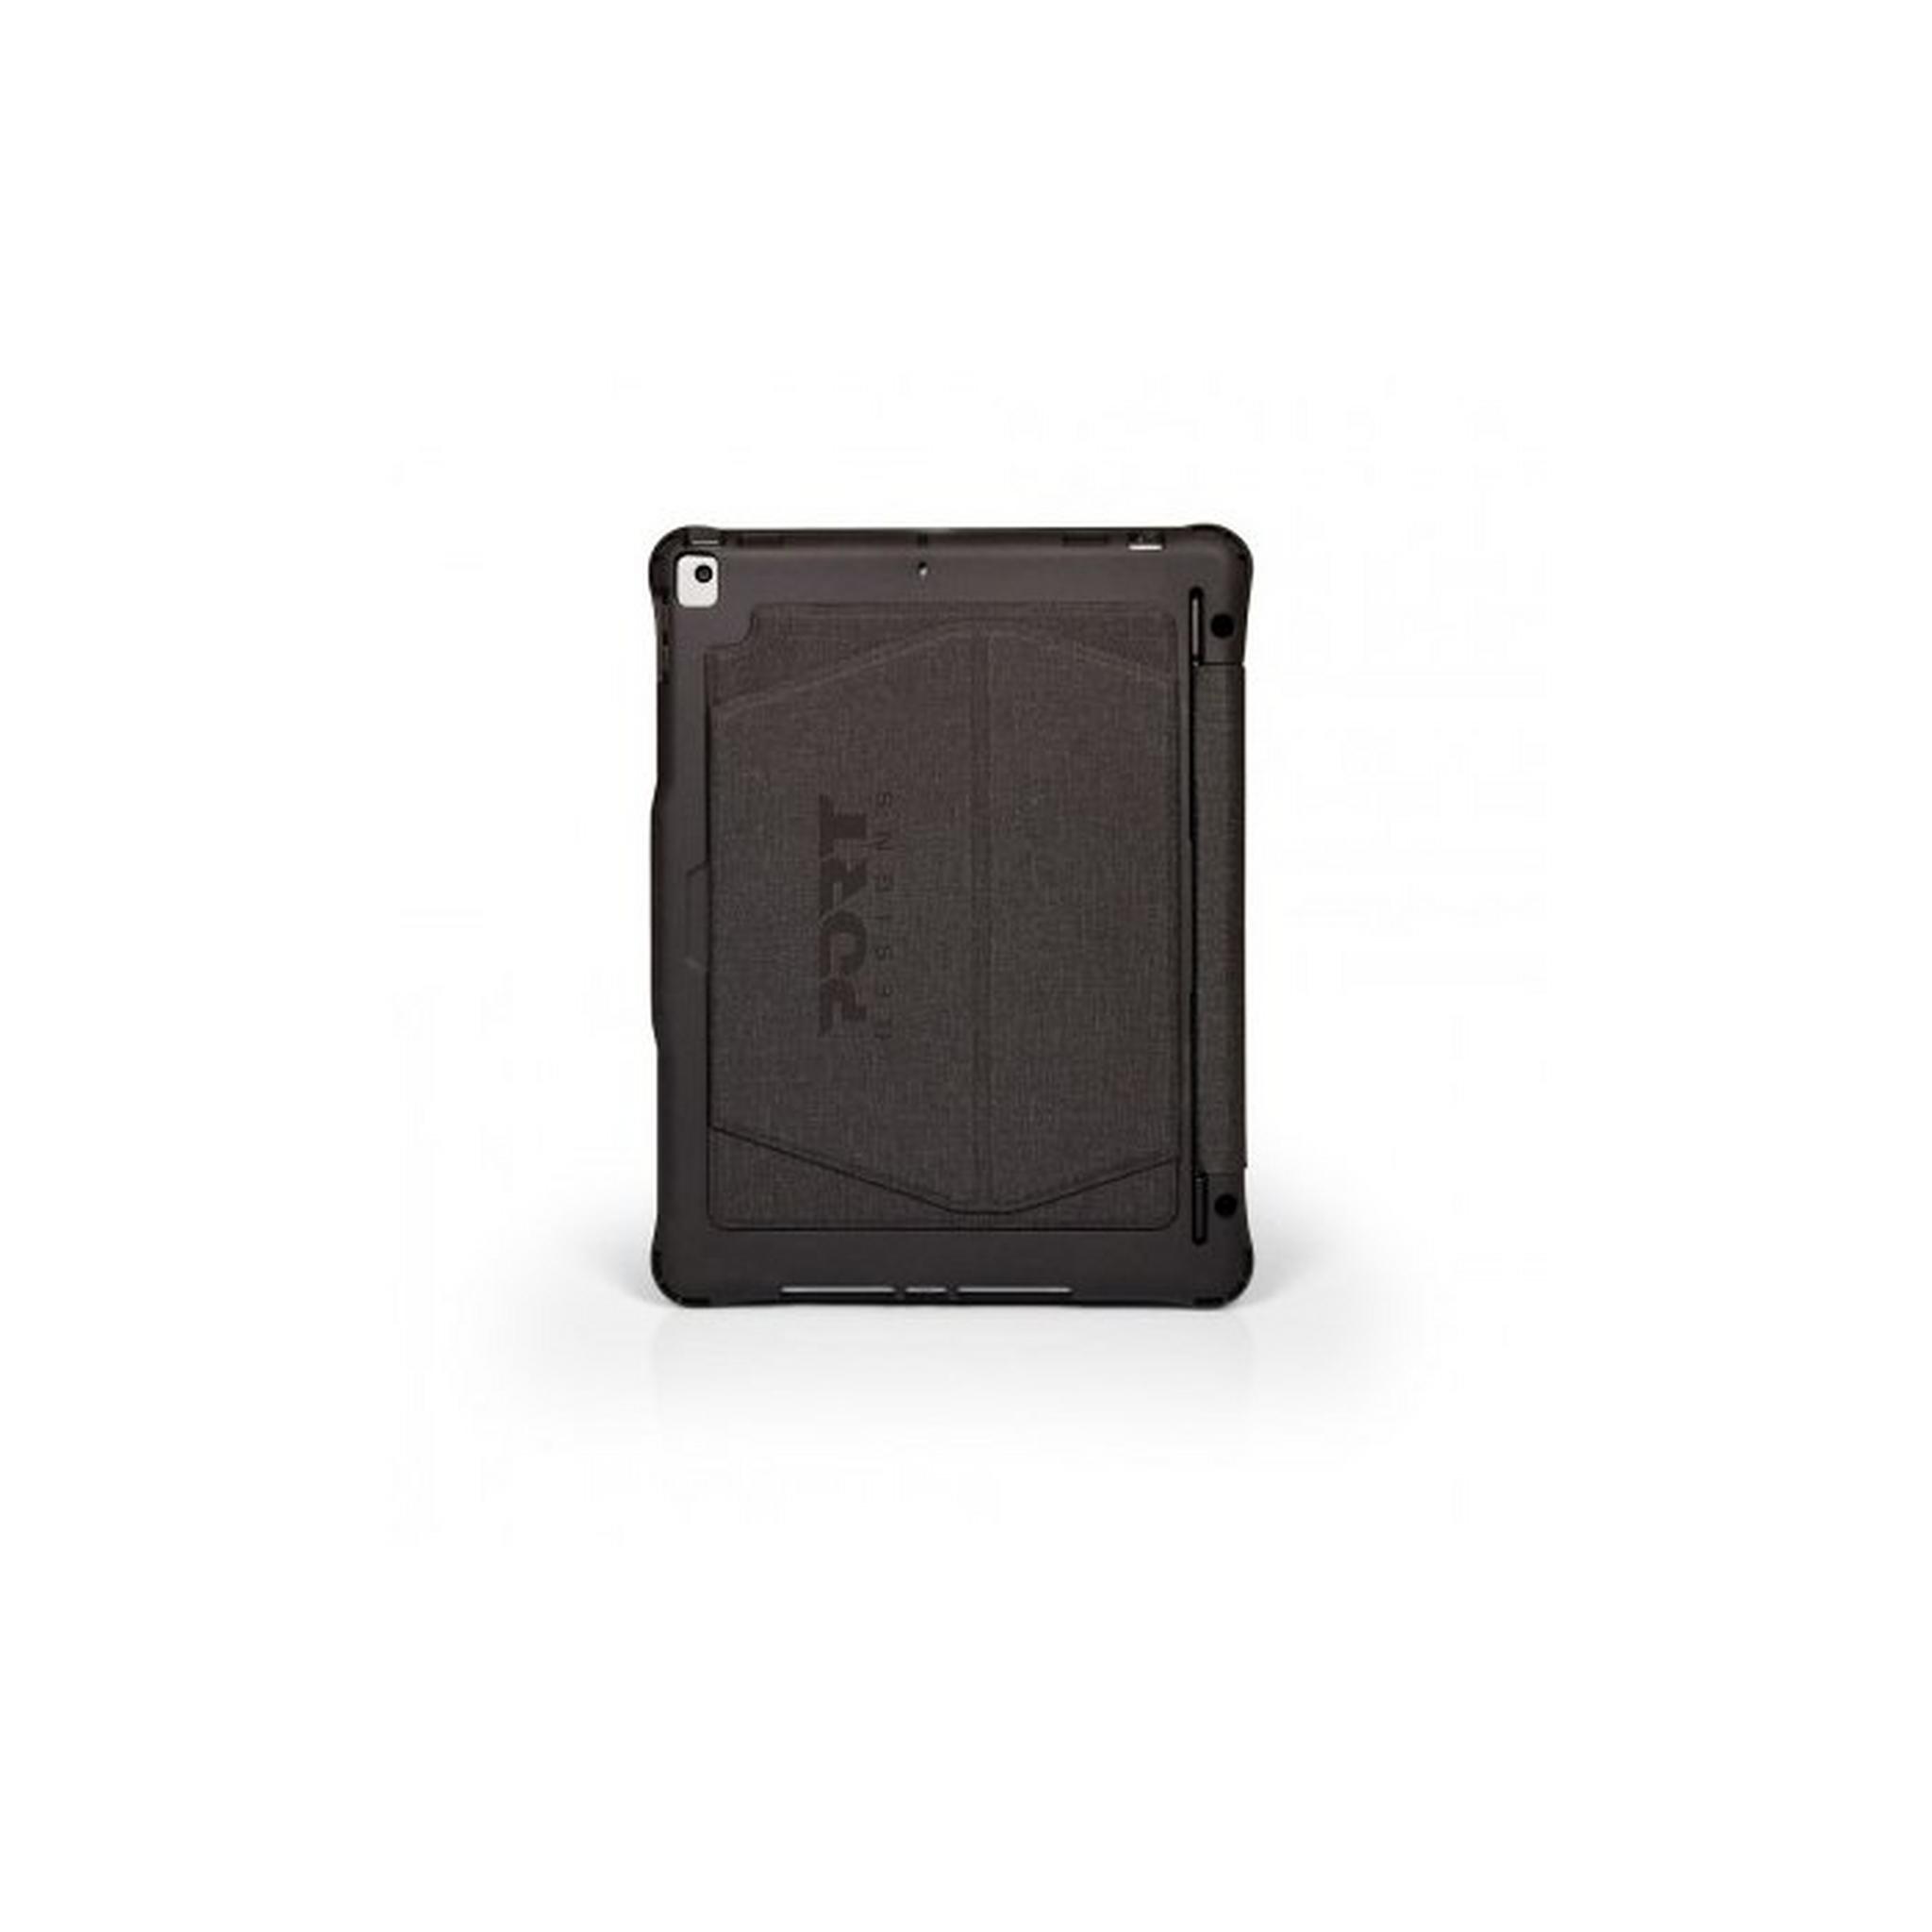 Port Manchester II Case for 10.2 iPad and 10.5-inch iPad Pro, 201505 - Black